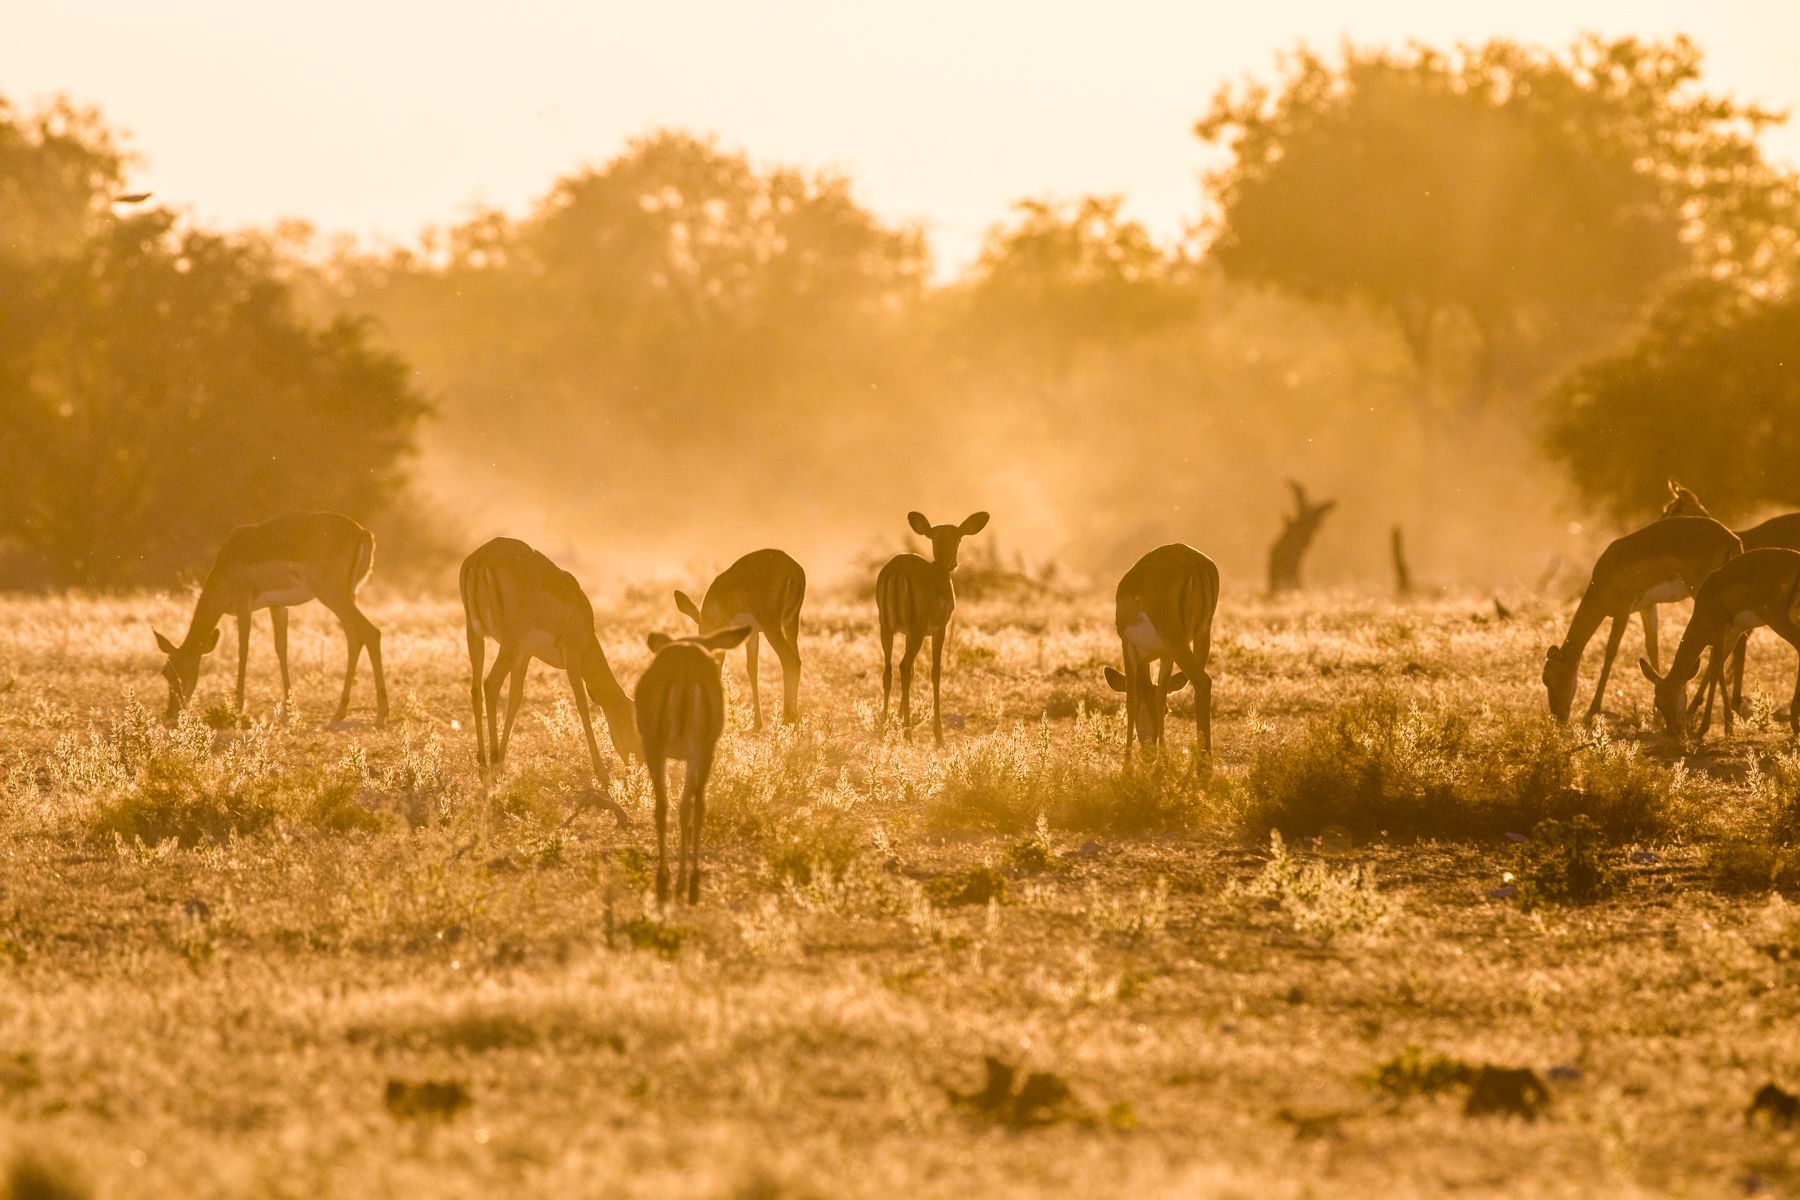 Sometimes the dust and light create incredible silhouette photography opportunities in Etosha